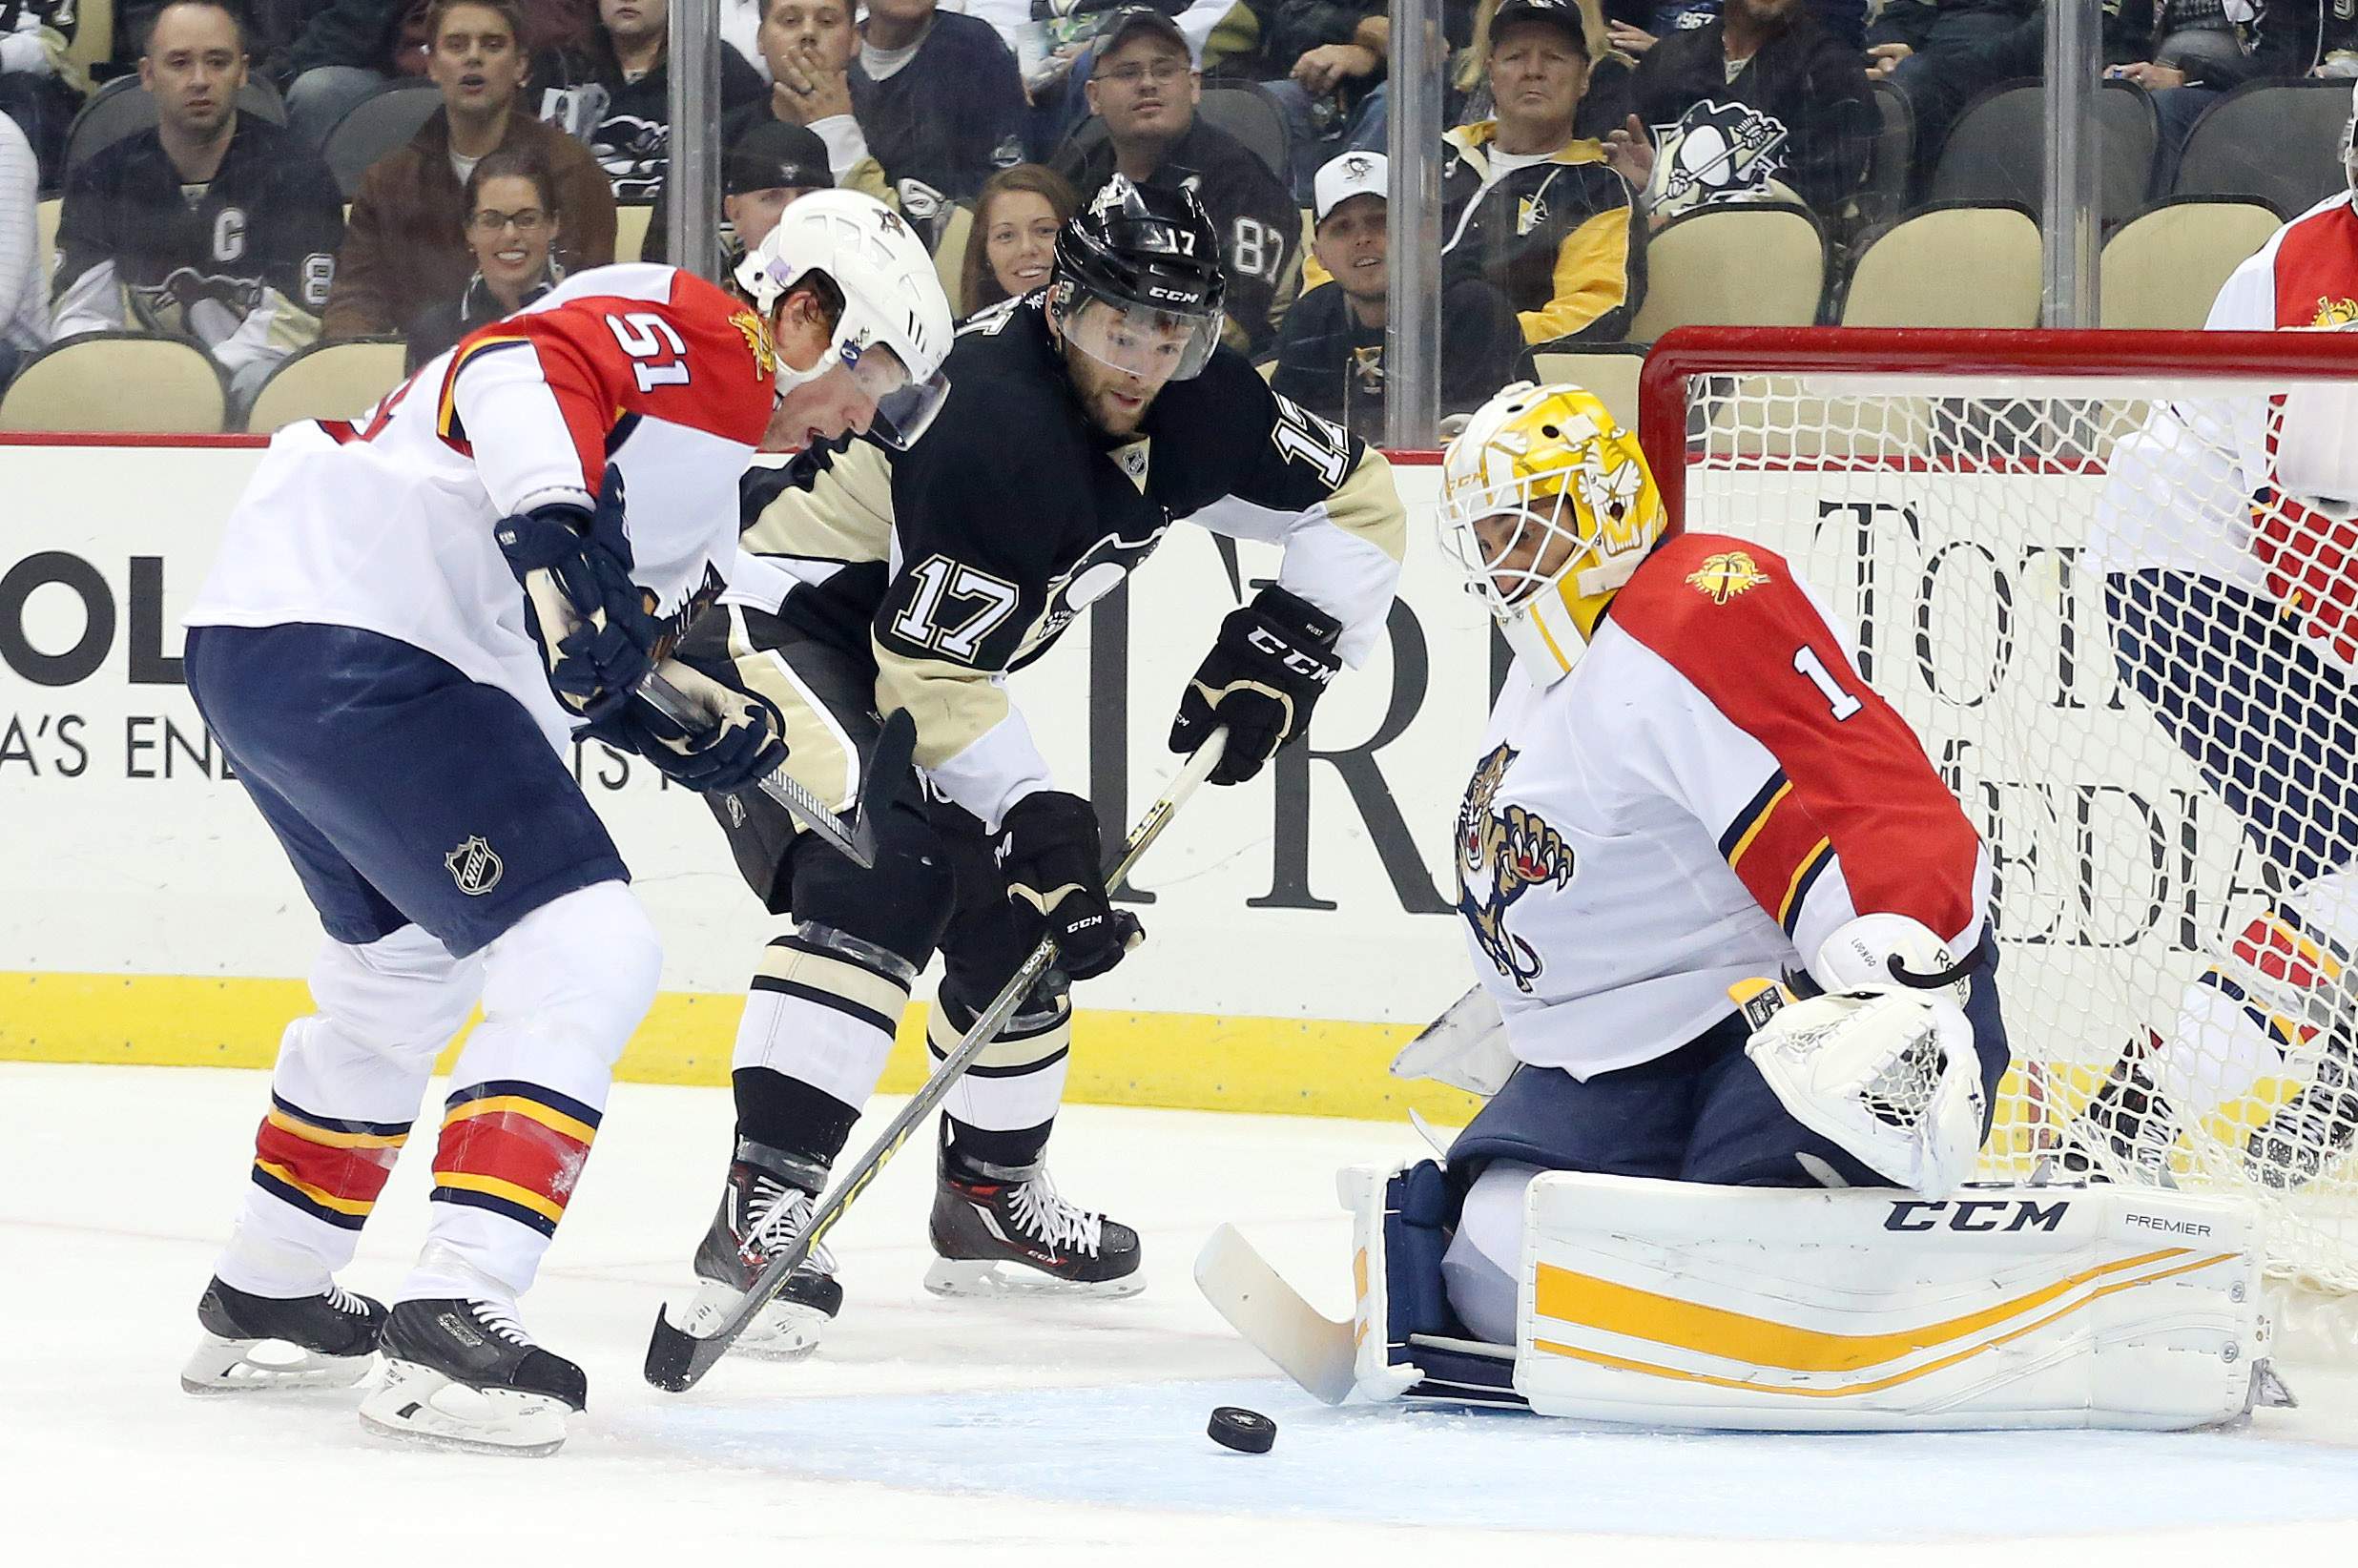 Oct 20, 2015; Pittsburgh, PA, USA; Florida Panthers goalie Roberto Luongo (1) makes a save against Pittsburgh Penguins right wing Bryan Rust (17) as defenseman Brian Campbell (51) depends during the first period at the CONSOL Energy Center. Mandatory Credit: Charles LeClaire-USA TODAY Sports